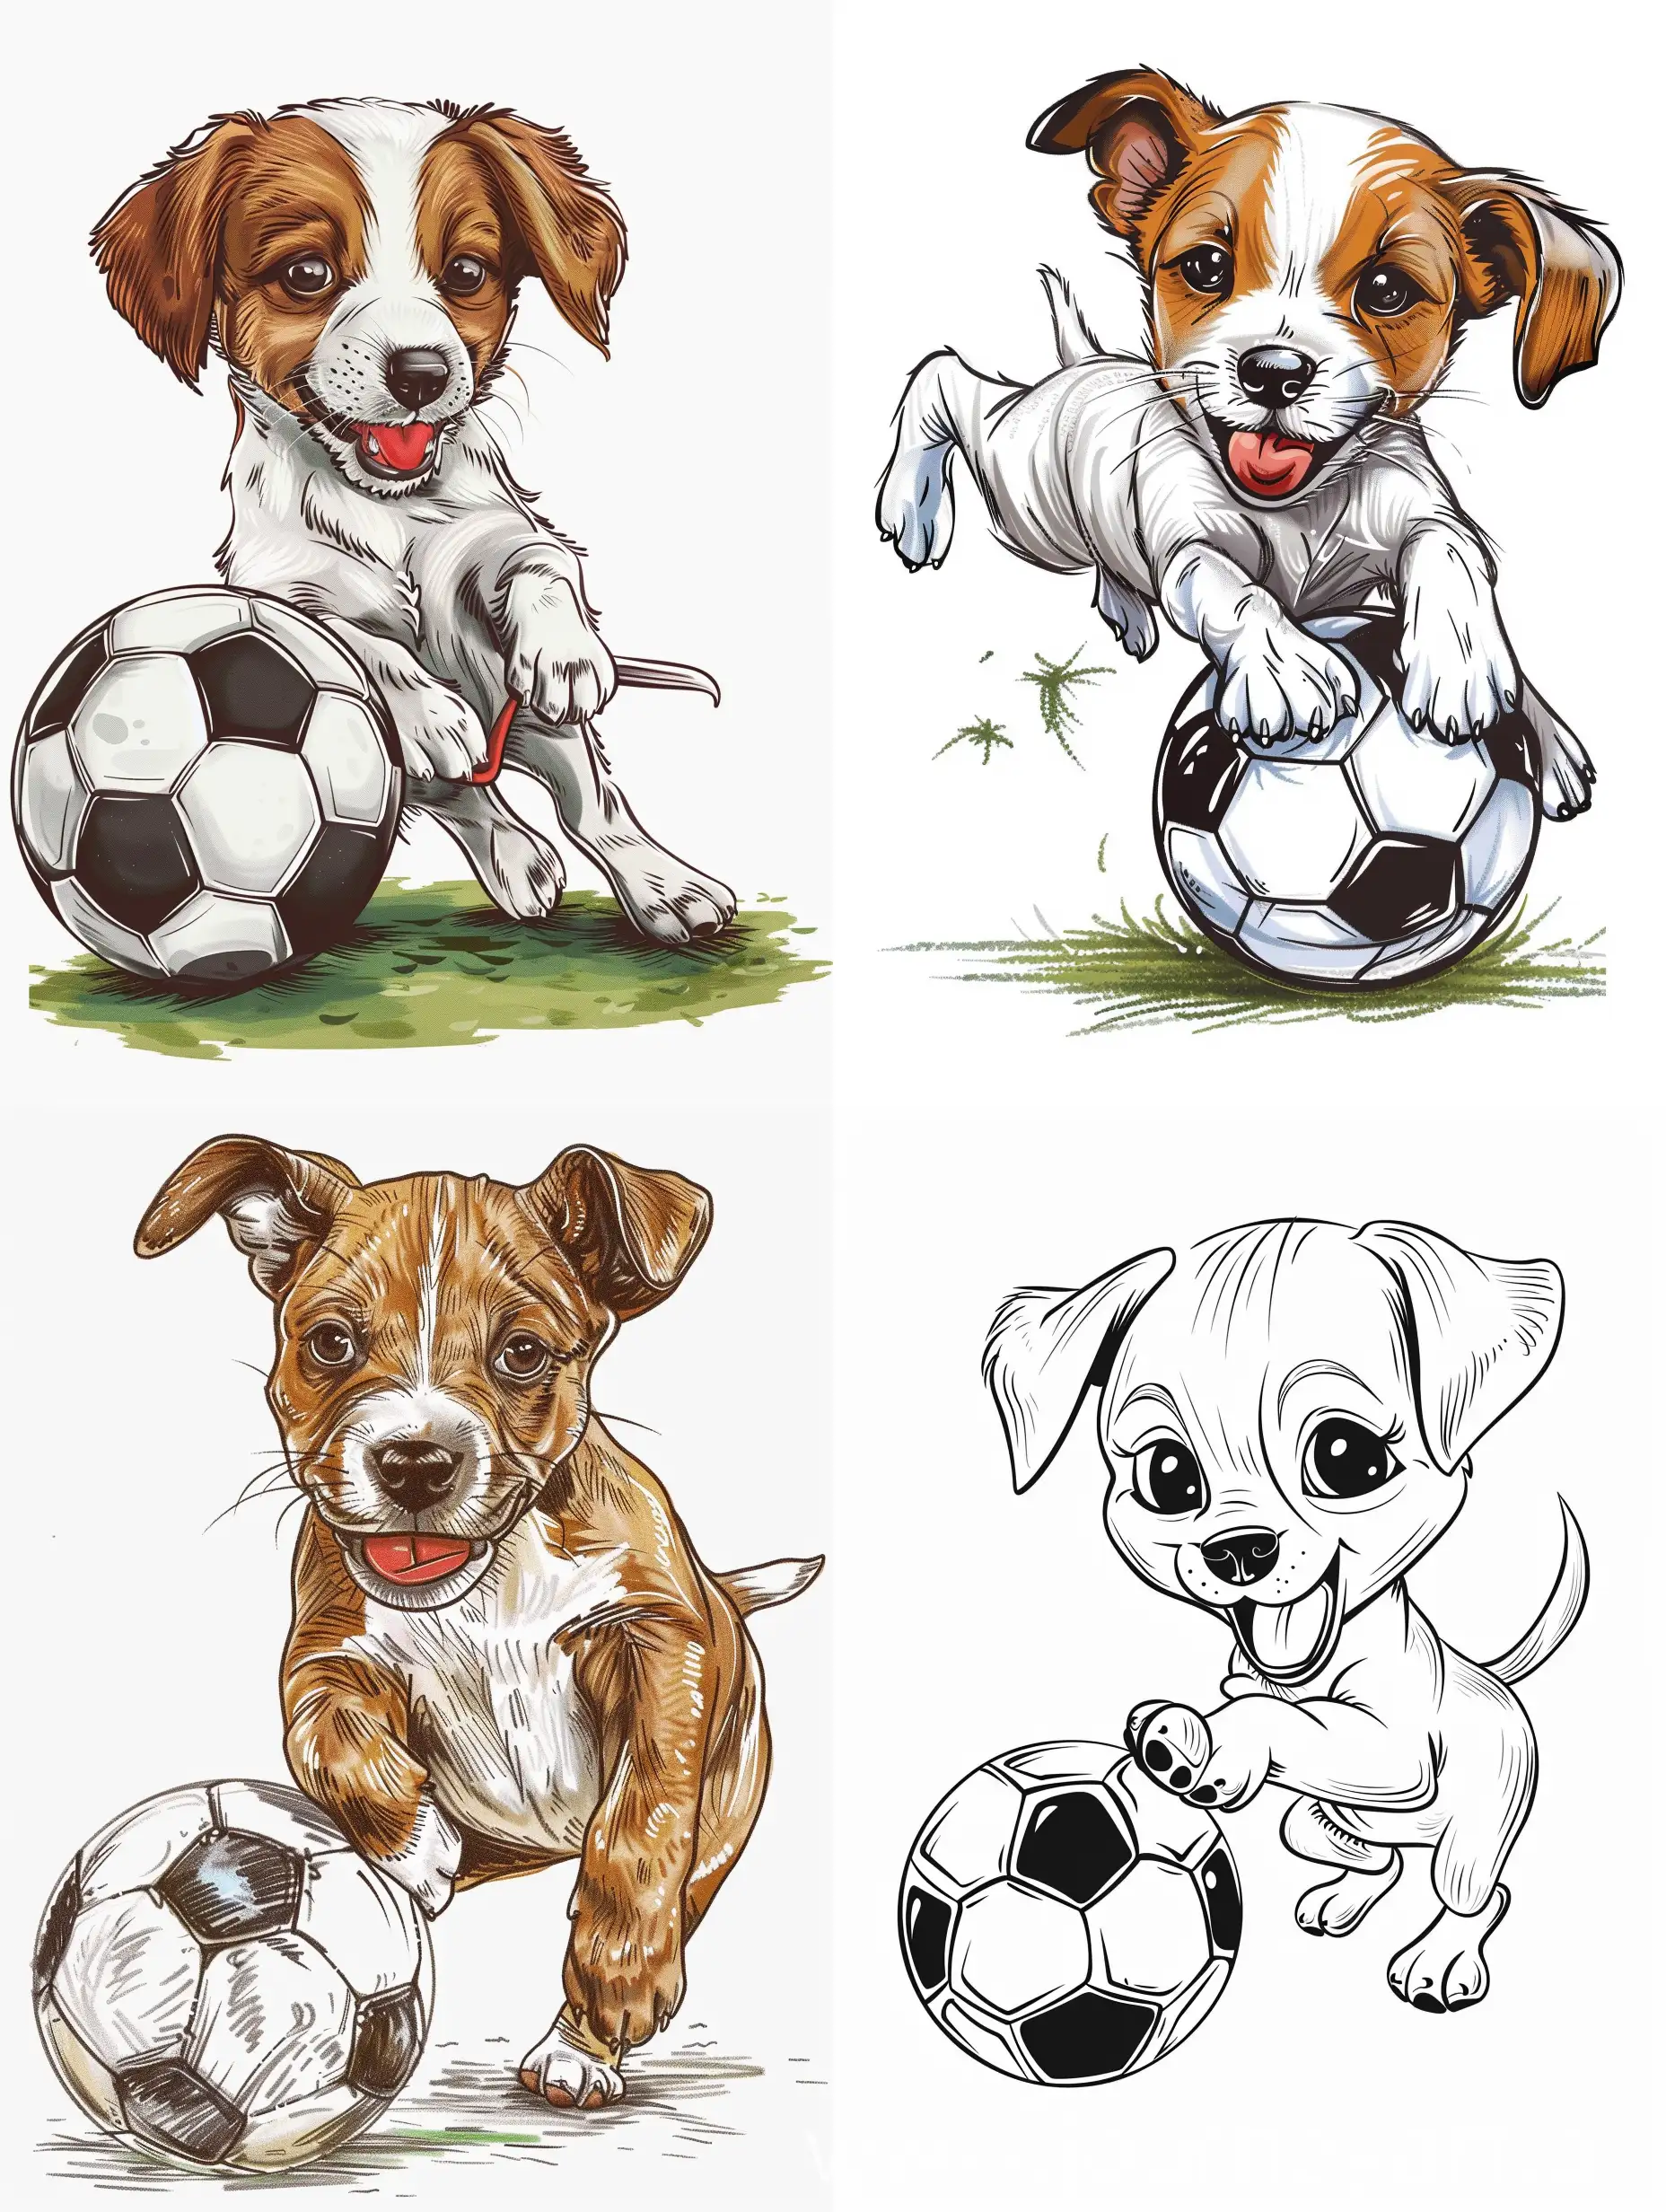 A cute puppy playing soccer for a drawing book